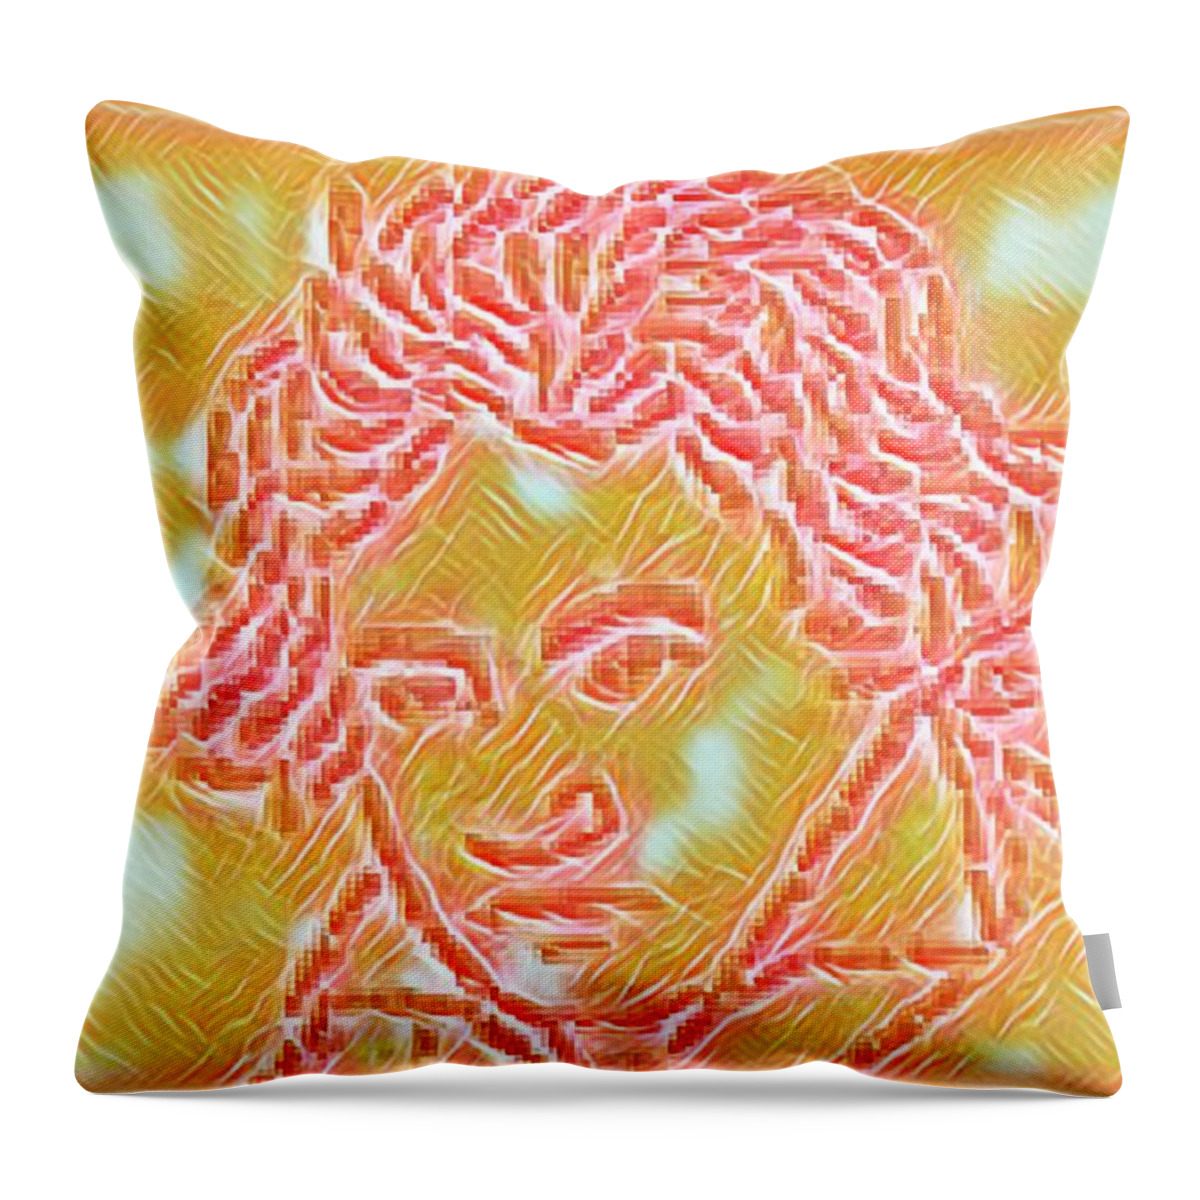  Throw Pillow featuring the mixed media Beethoven Alabama by Bencasso Barnesquiat